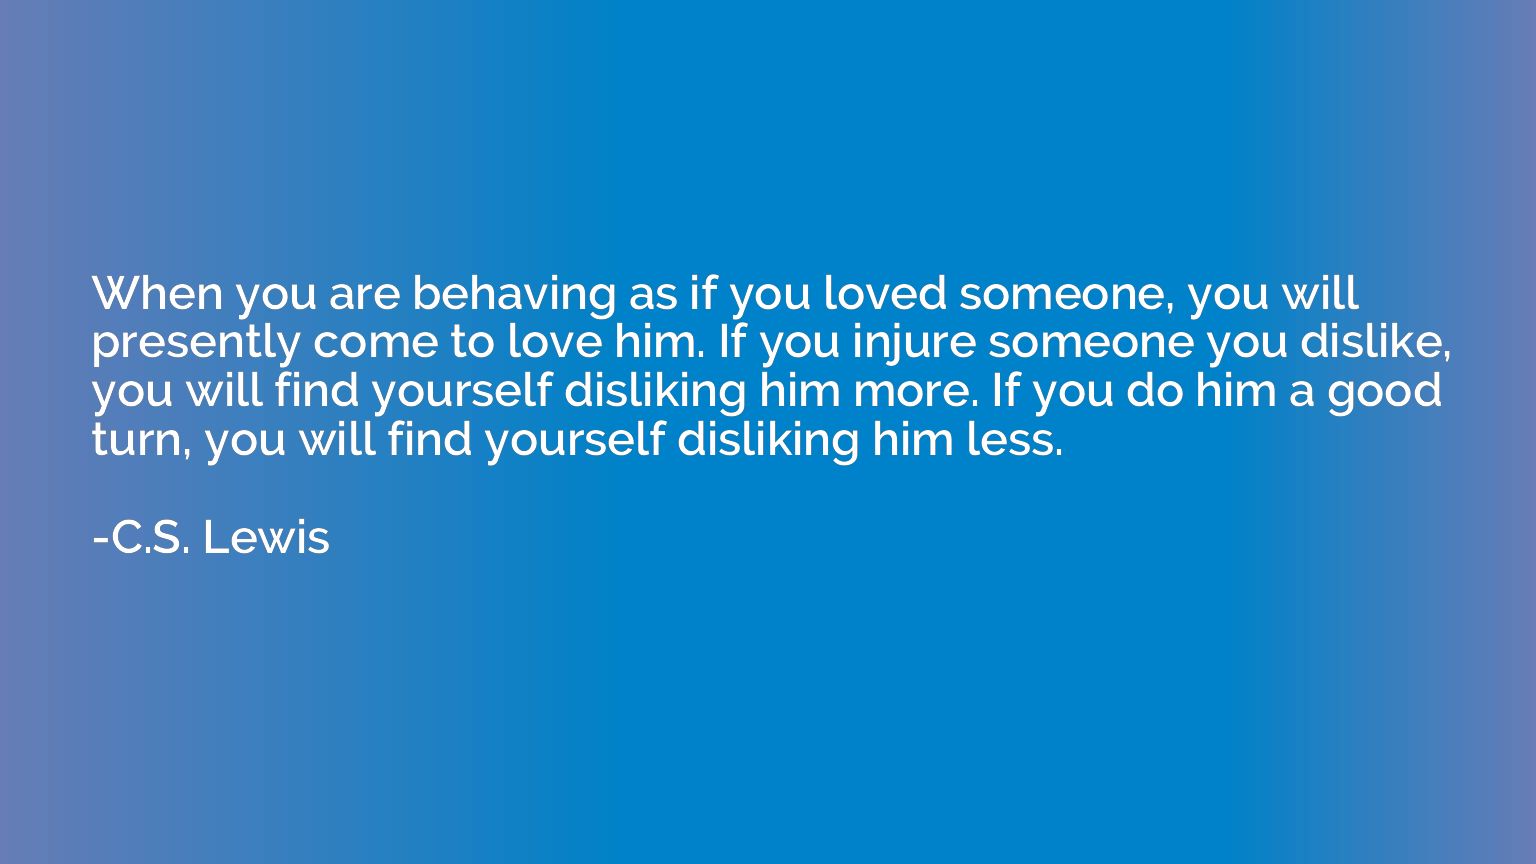 When you are behaving as if you loved someone, you will pres